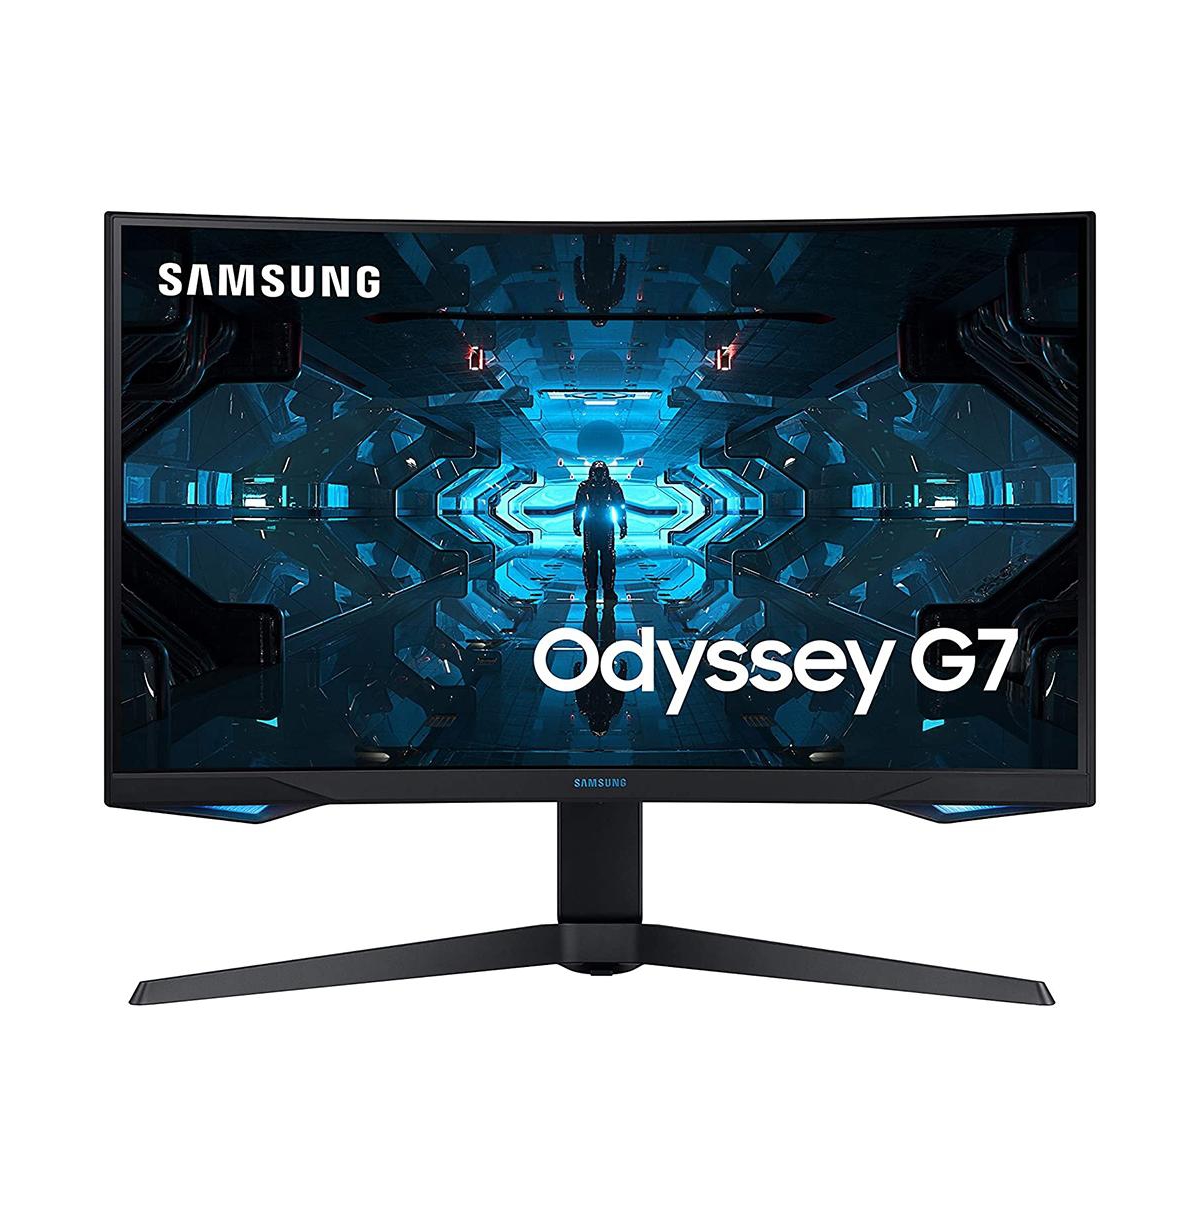 UPC 887276413136 product image for 32 inch Odyssey G7 Gaming Monitor Full G-Sync and FreeSync Premium Pro Support | upcitemdb.com